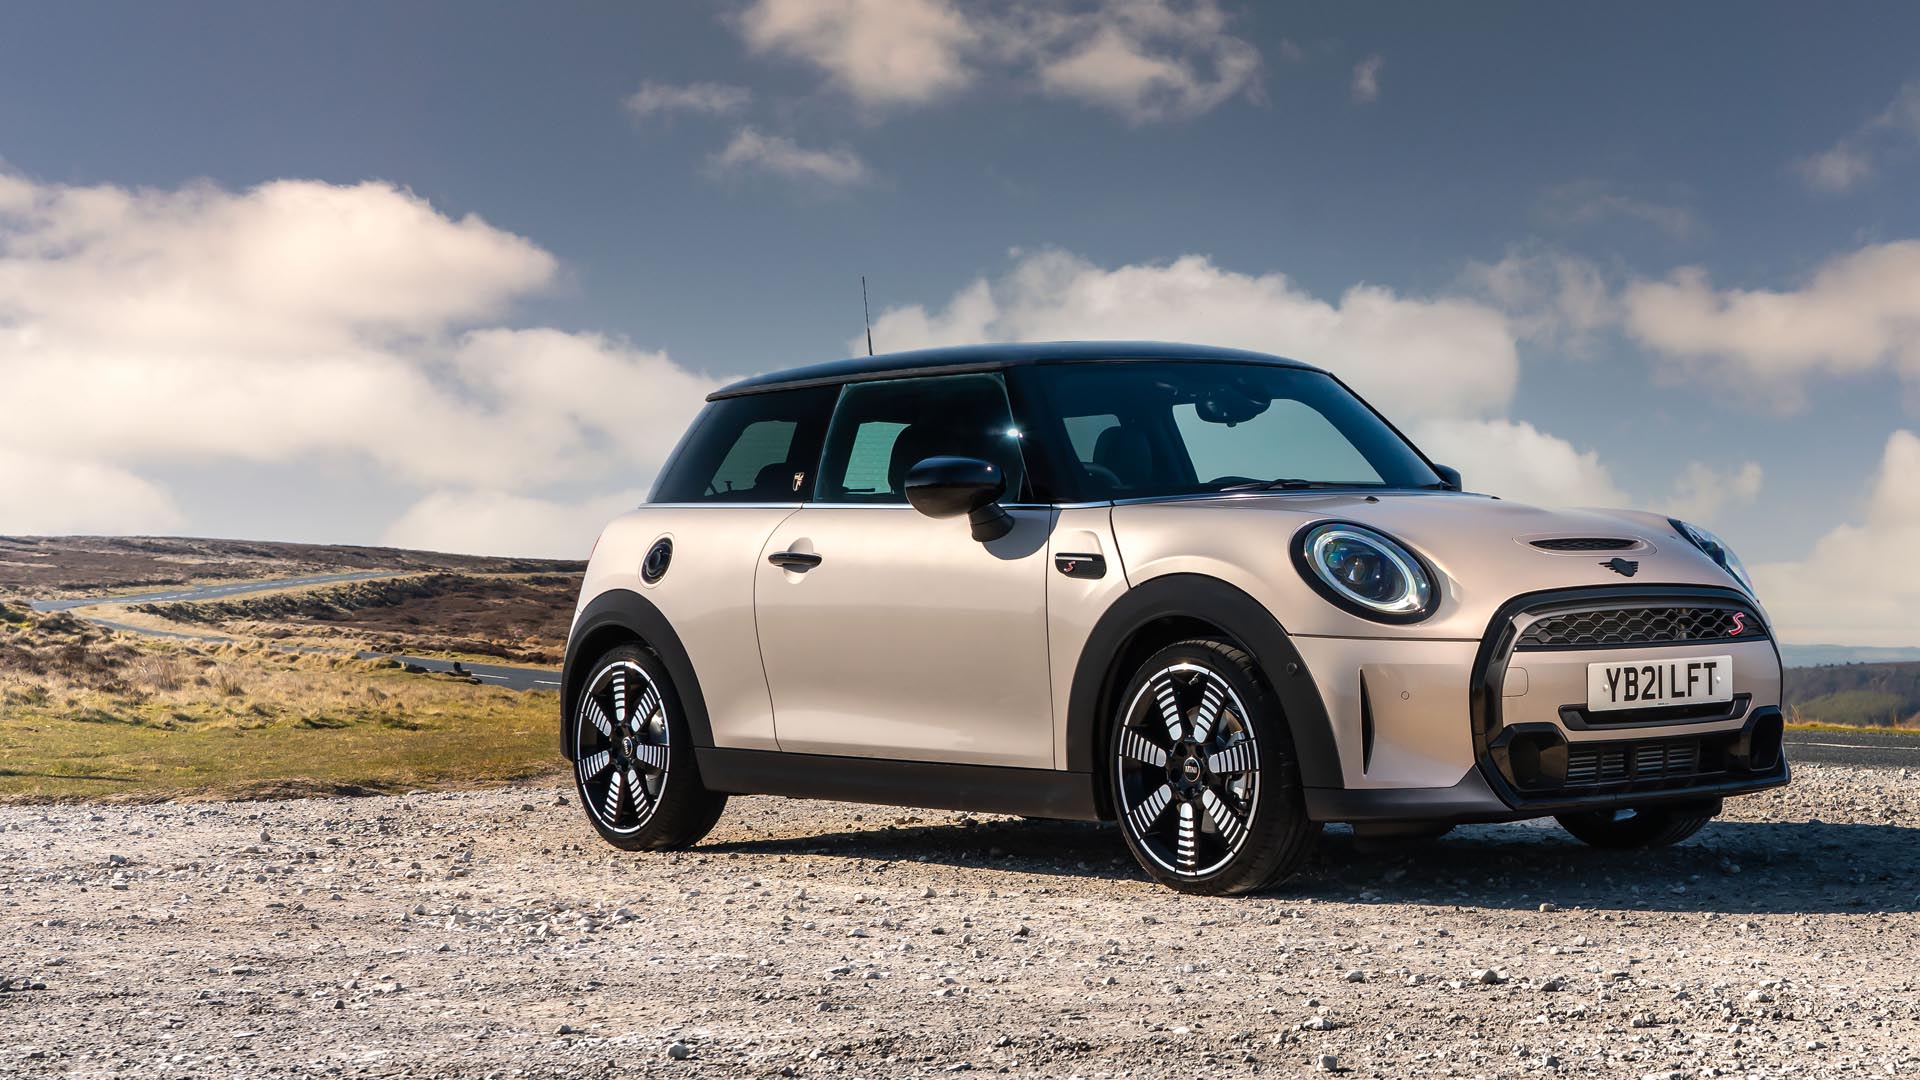 MINI Hatch Review & Prices 2023 | AutoTrader UK